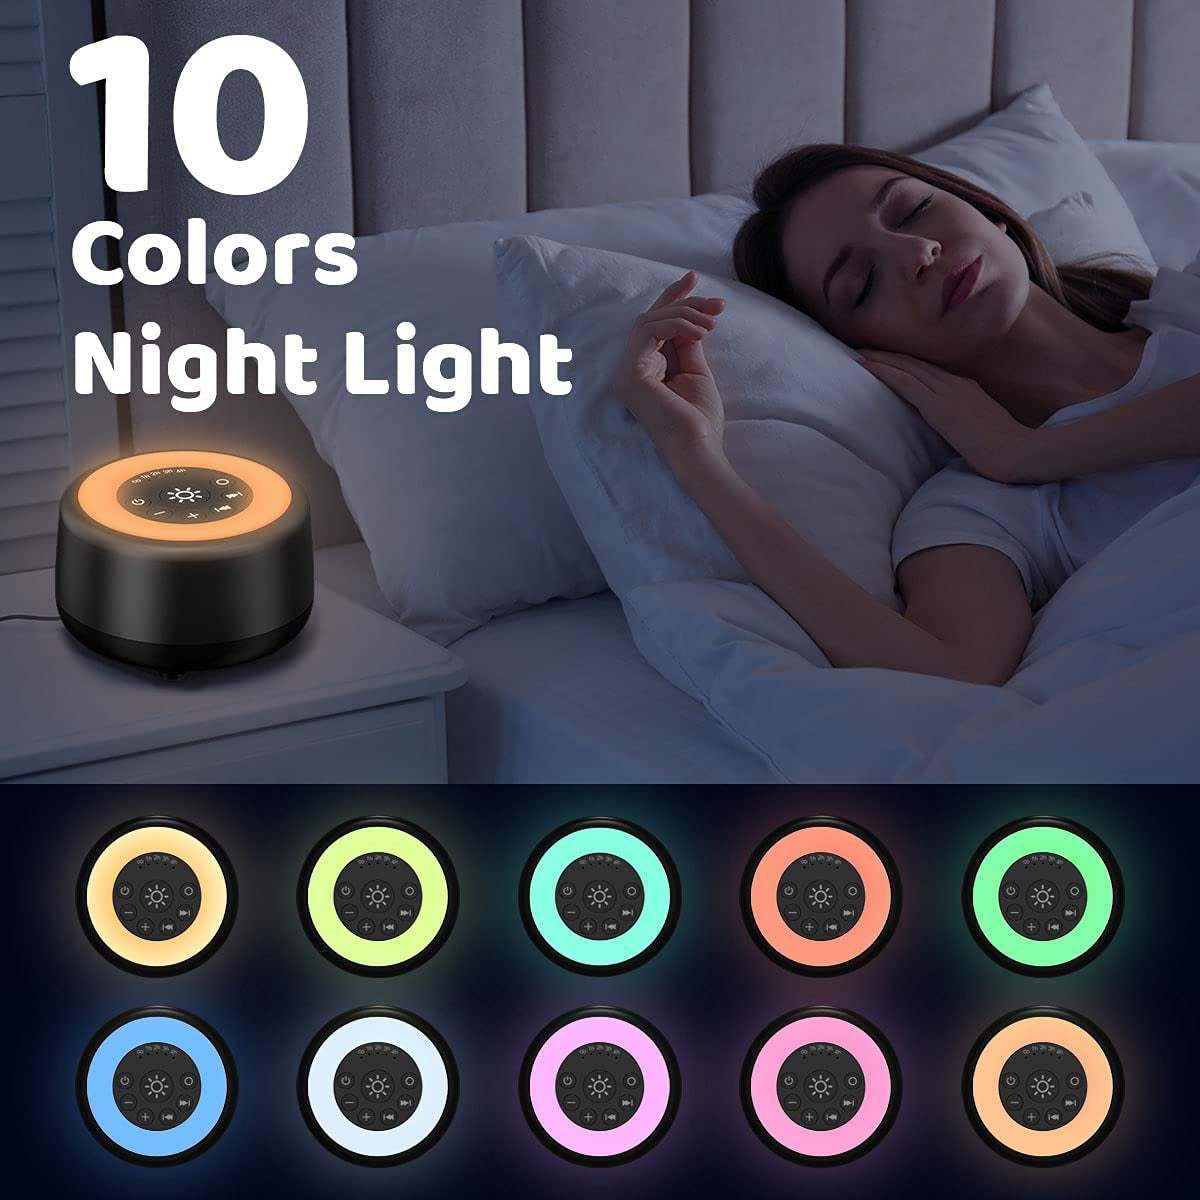 Sound White Noise Machine with 25 Soothing Sounds and 10 Colors Warm Night Light 4 Brightness Levels 32 Volume Levels 5 Timer and Memory Function Perfect for Baby Kids Adults Seniors Sleeping